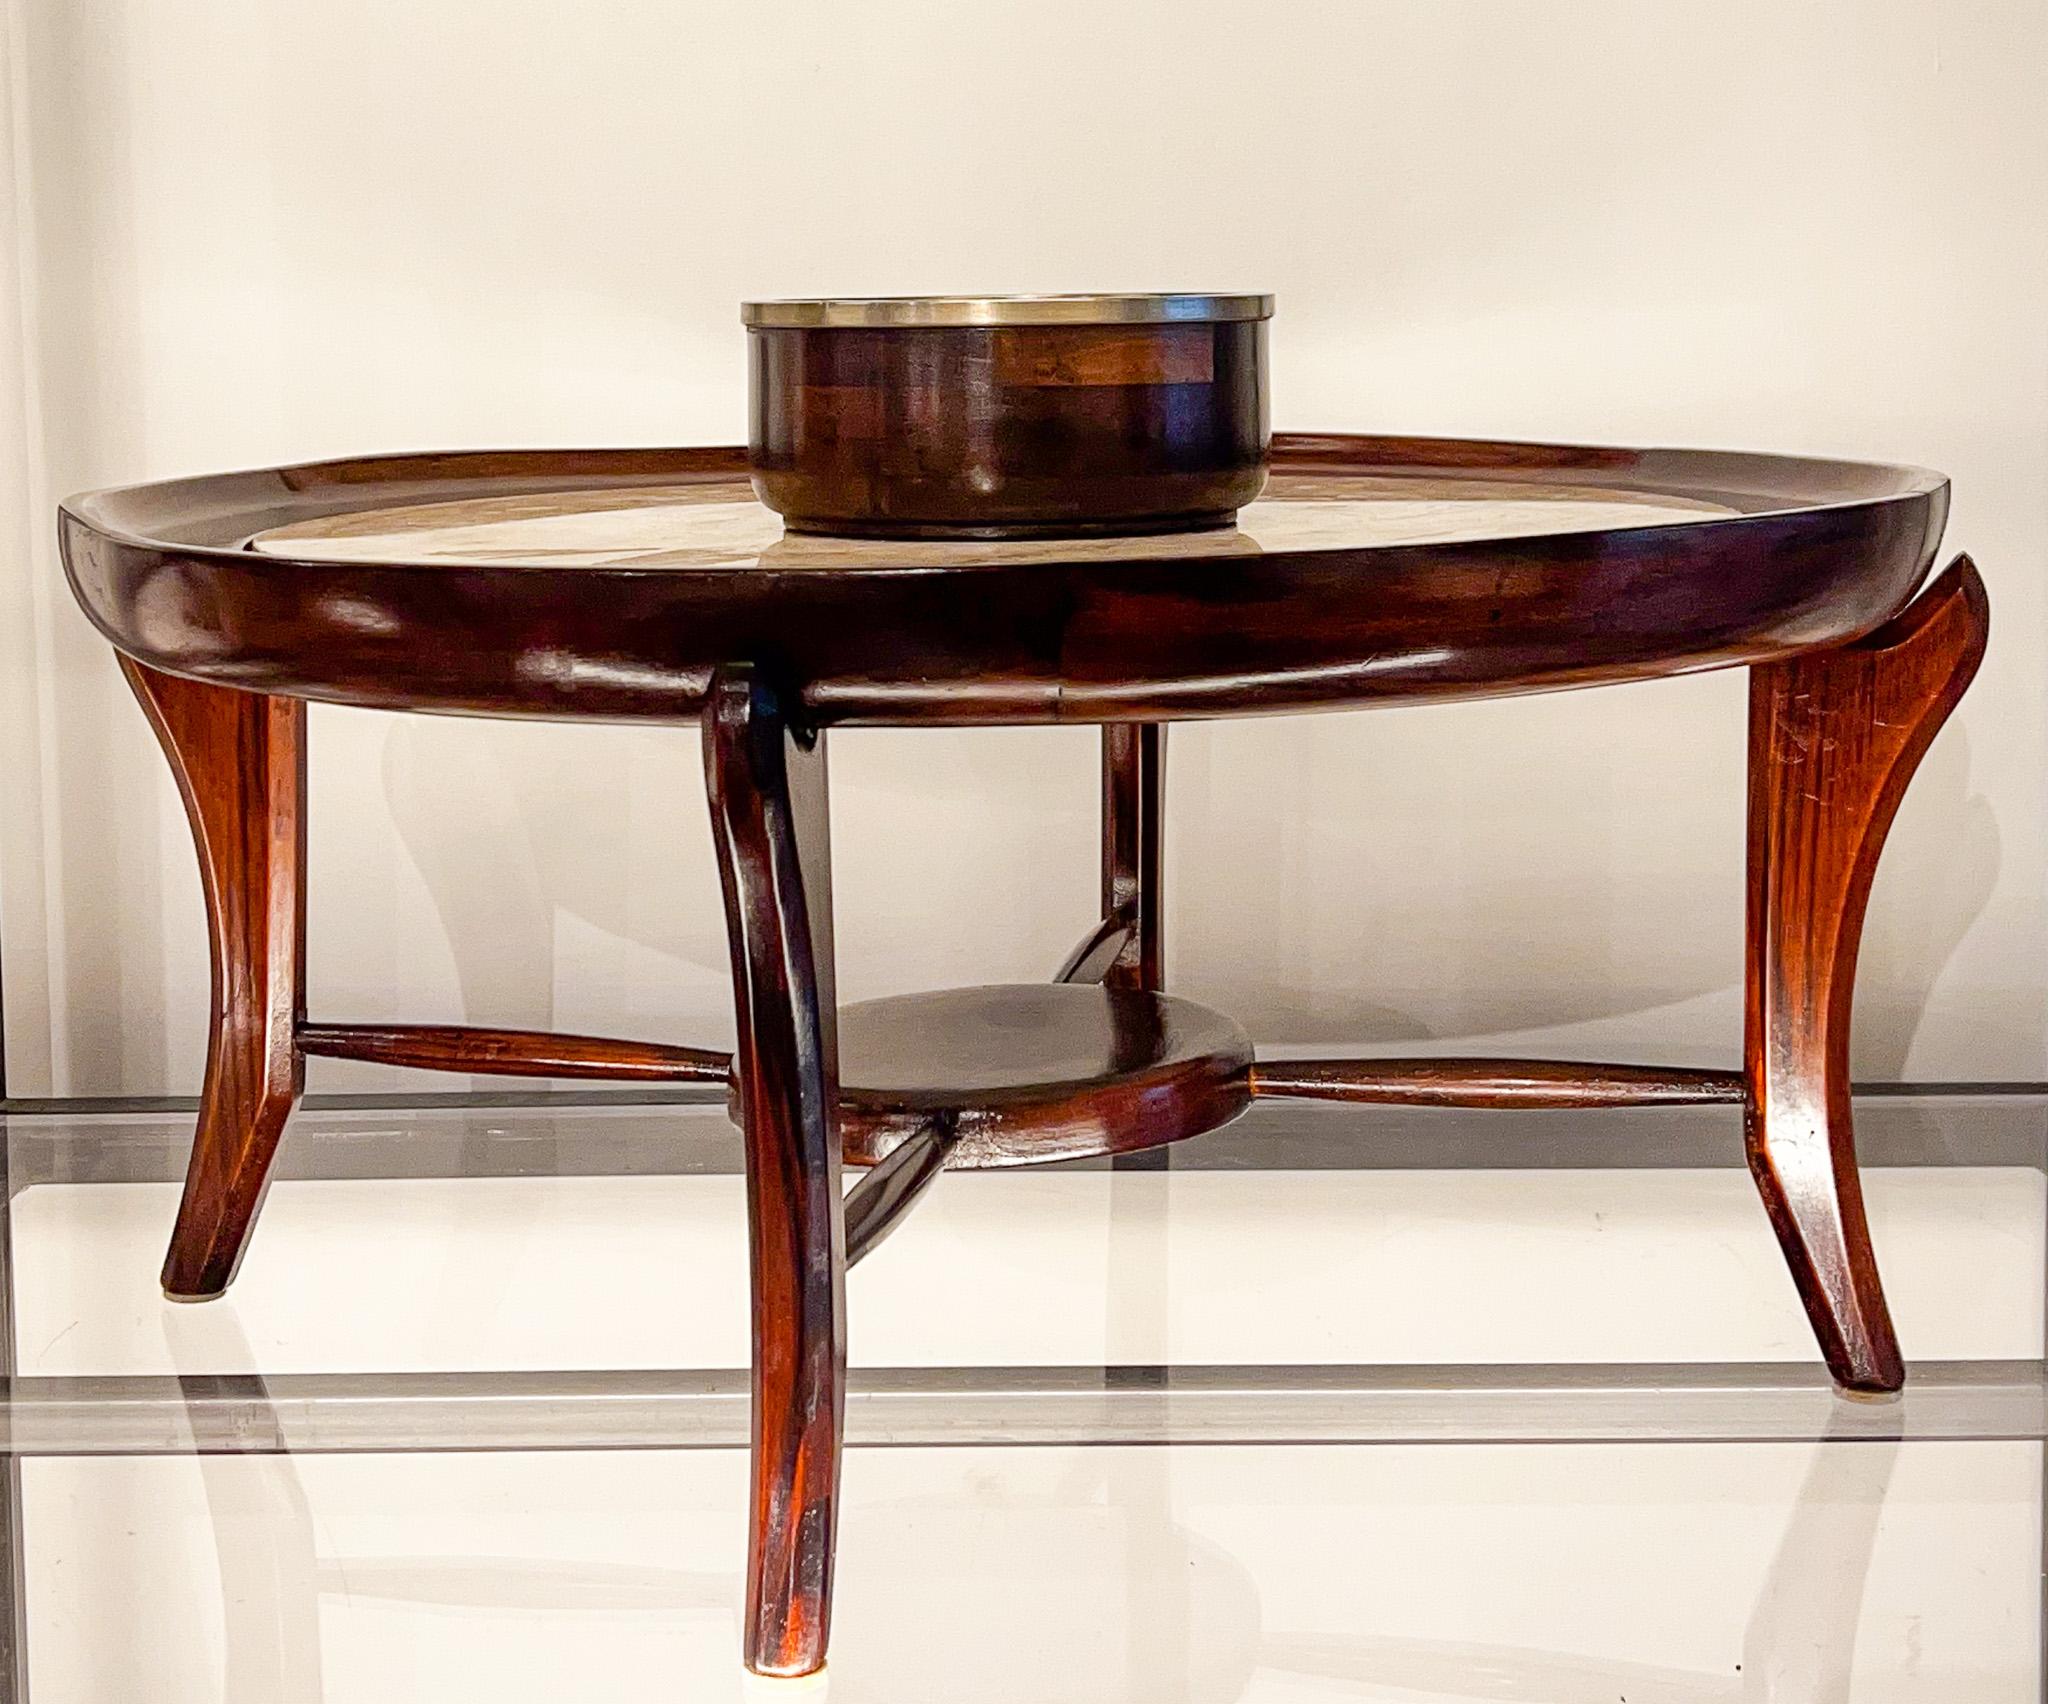 Hand-Carved Mid-Century Modern Coffee Table in Hardwood&Travertine Giuseppe Scapinelli 1954 For Sale